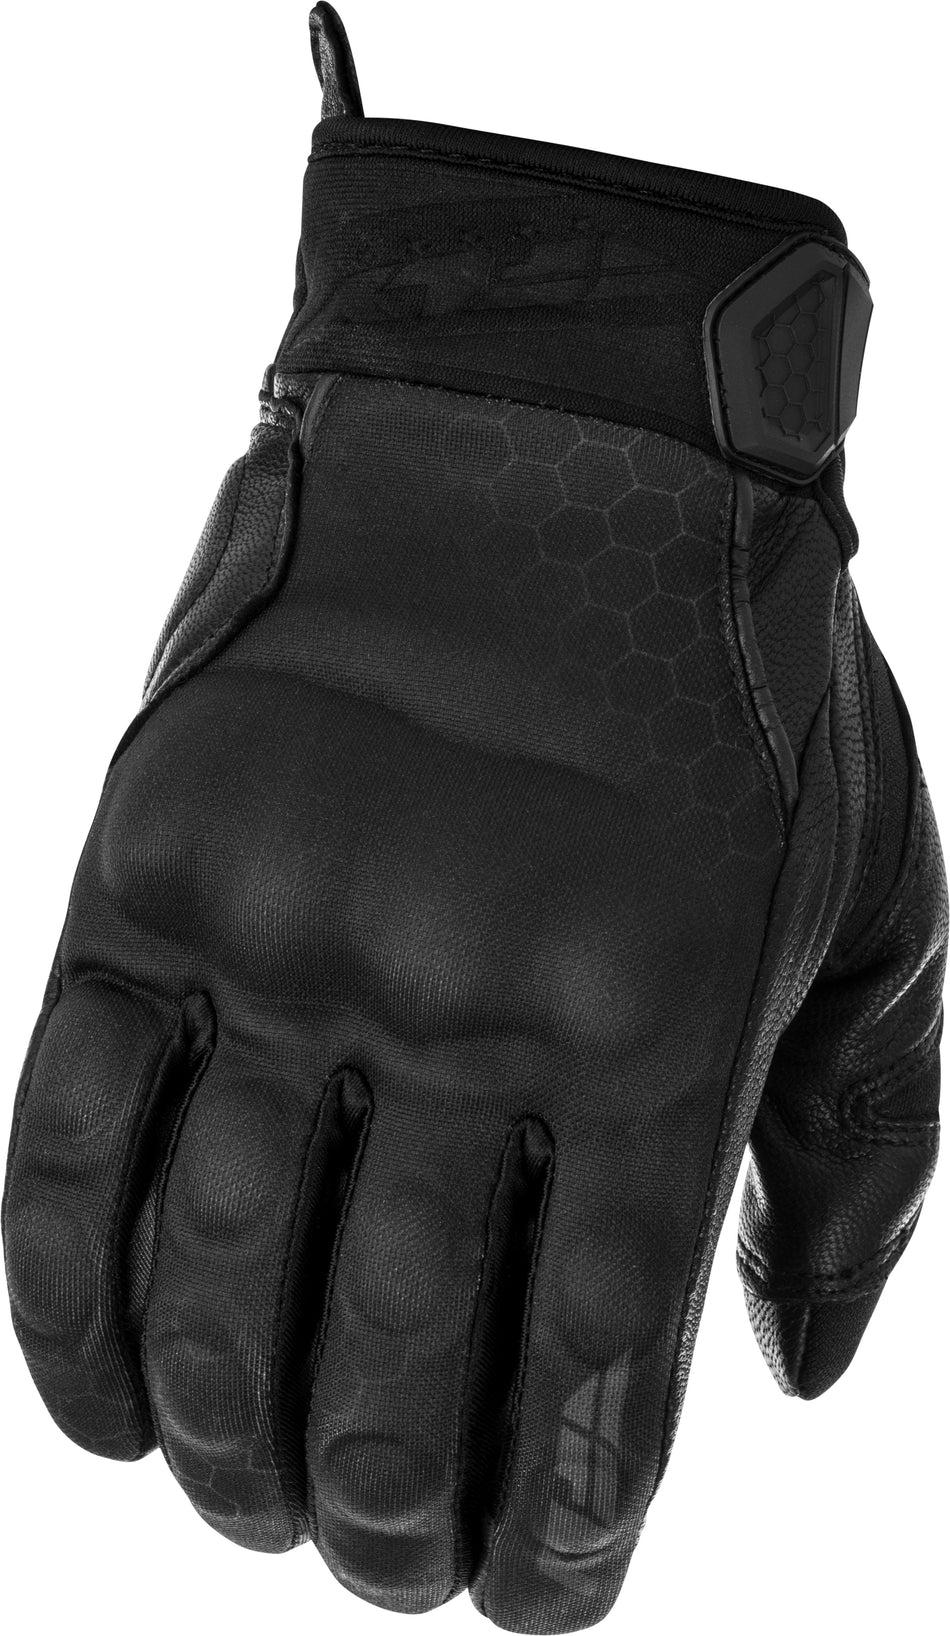 FLY RACING Subvert Gloves Blackout Sm 476-2075S